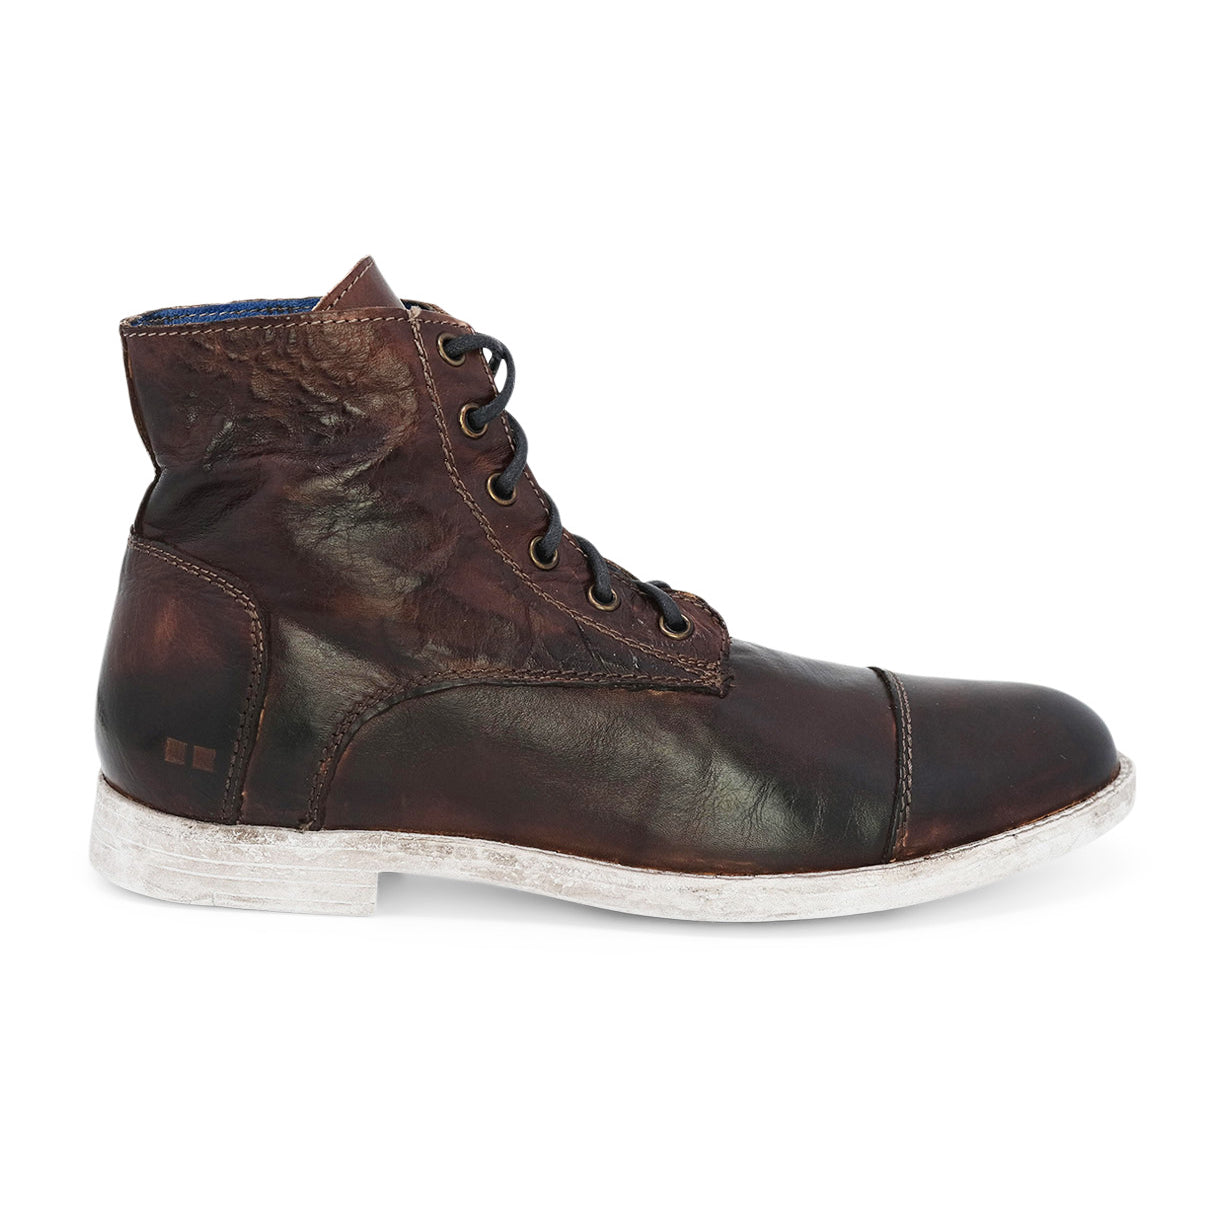 A men's brown leather boot with white soles, the Leonardo by Bed Stu.